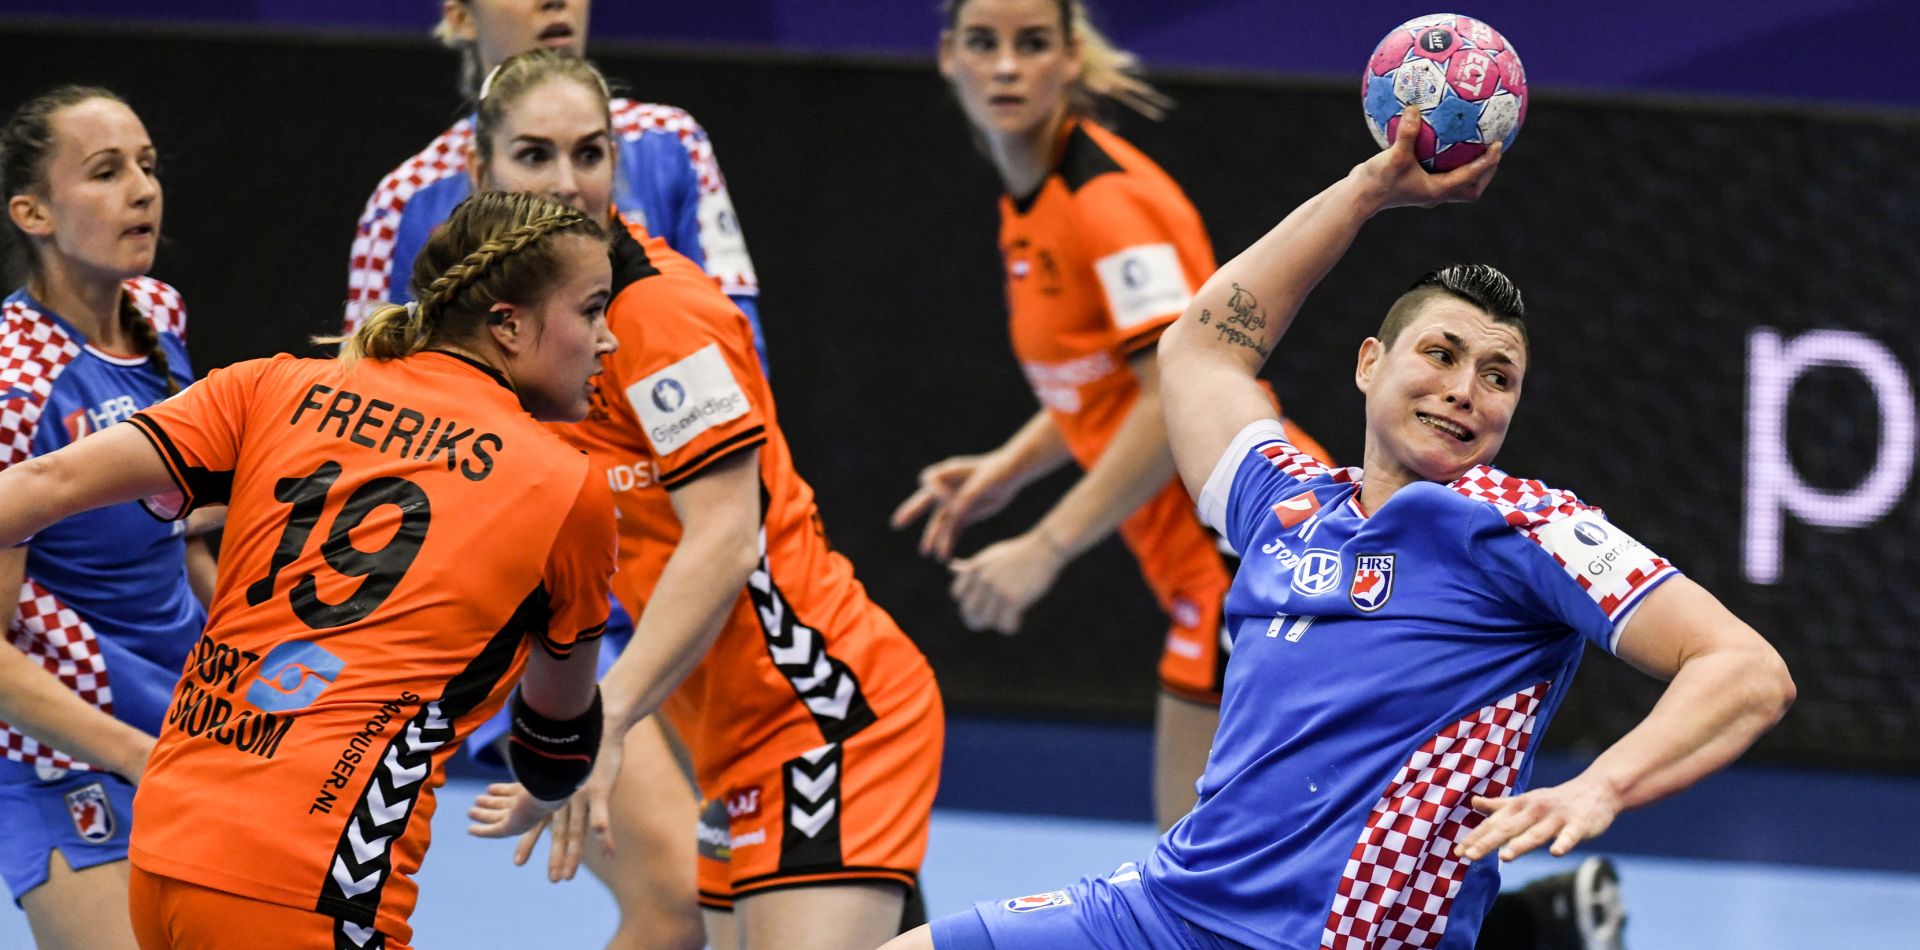 epa07210555 Merel Freriks from Netherlands (L) and Katarina Jezic from Croatia (R) in action during the EHF Women EURO 2018 handball match between Netherlands and Croatia in Montbeliard, France, 05 December 2018.  EPA/PATRICK SEEGER